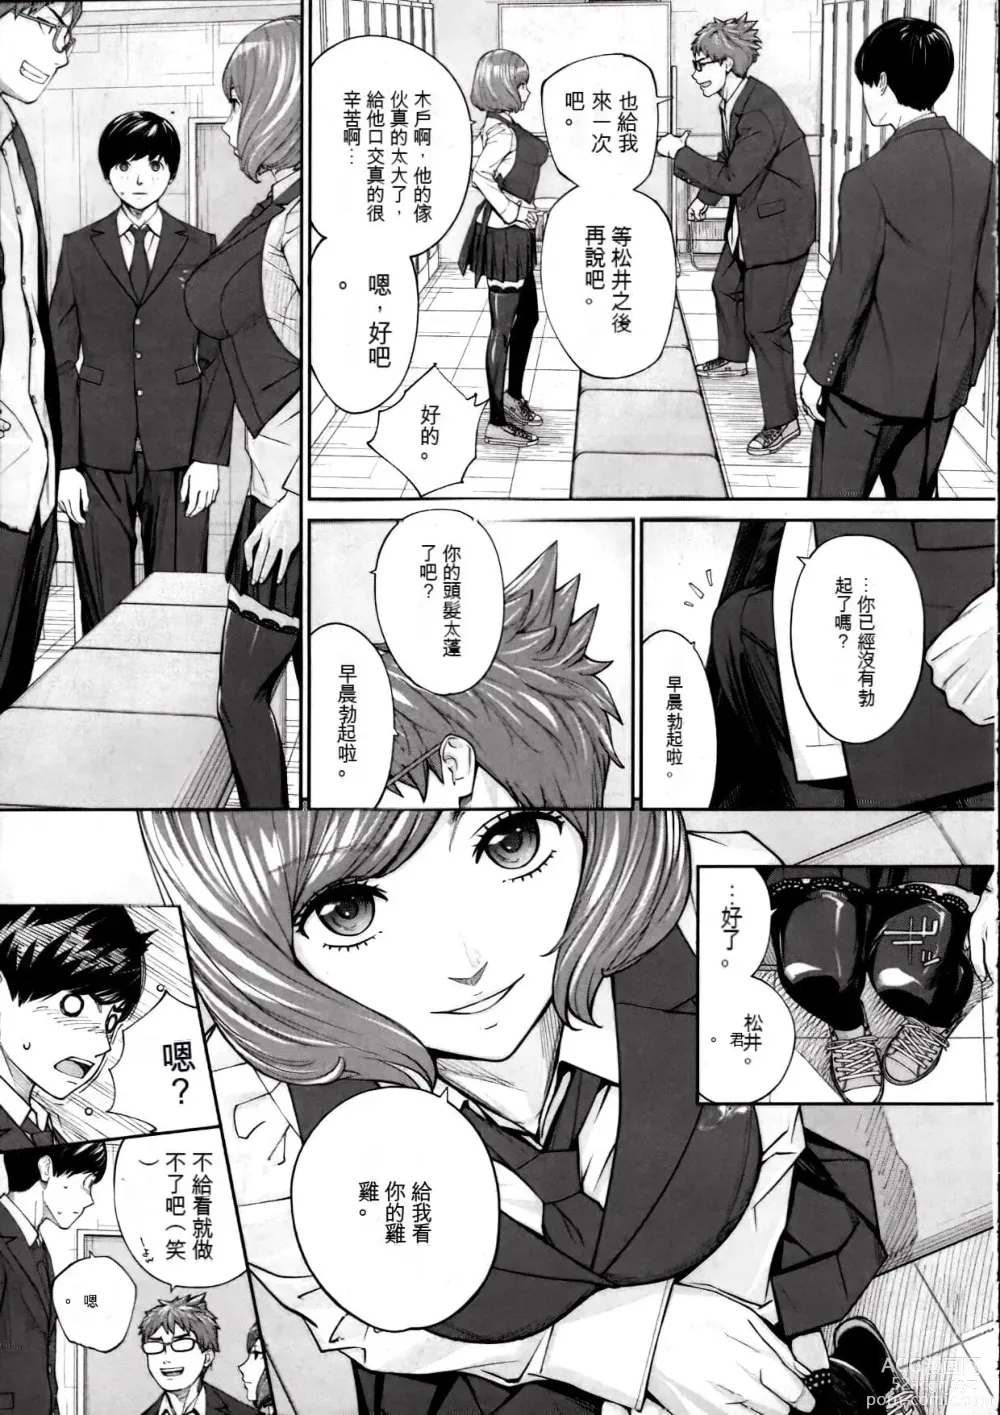 Page 292 of doujinshi 千歳+有罪